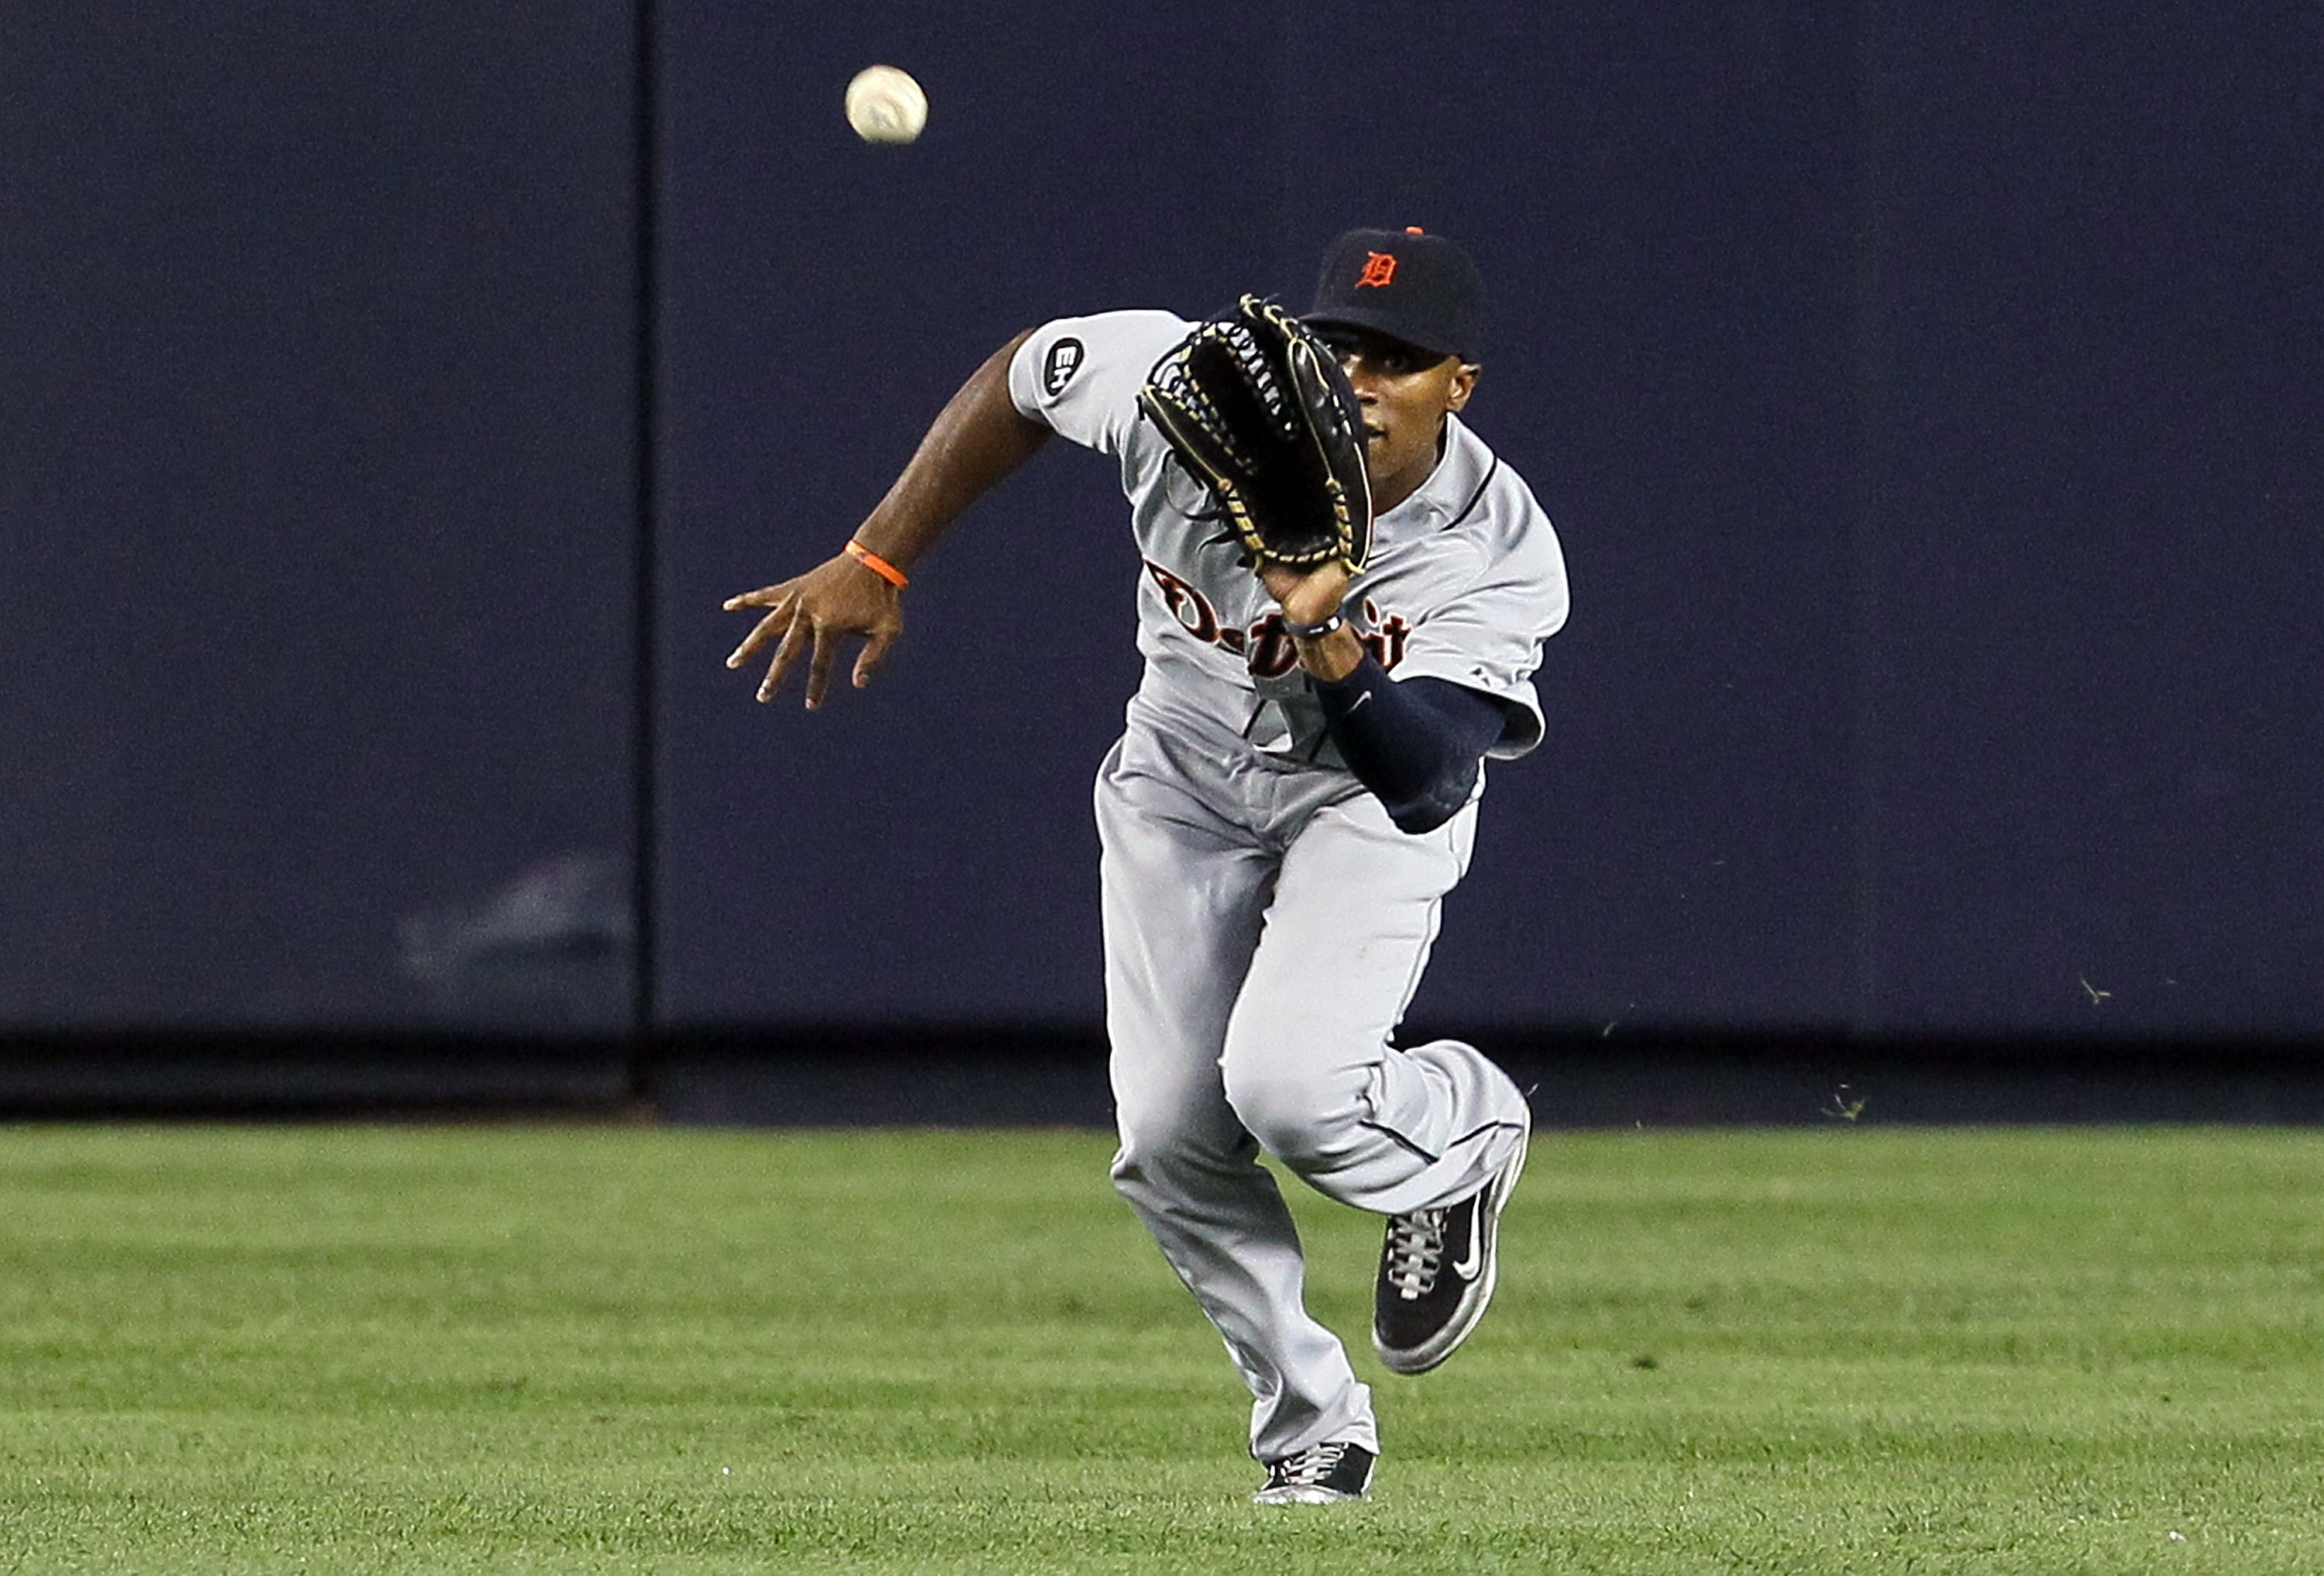 NEW YORK - AUGUST 16:  Austin Jackson #14 of the Detroit Tigers makes a catch for an out against the New York Yankees on August 16, 2010 at Yankee Stadium in the Bronx borough of New York City.  (Photo by Jim McIsaac/Getty Images)